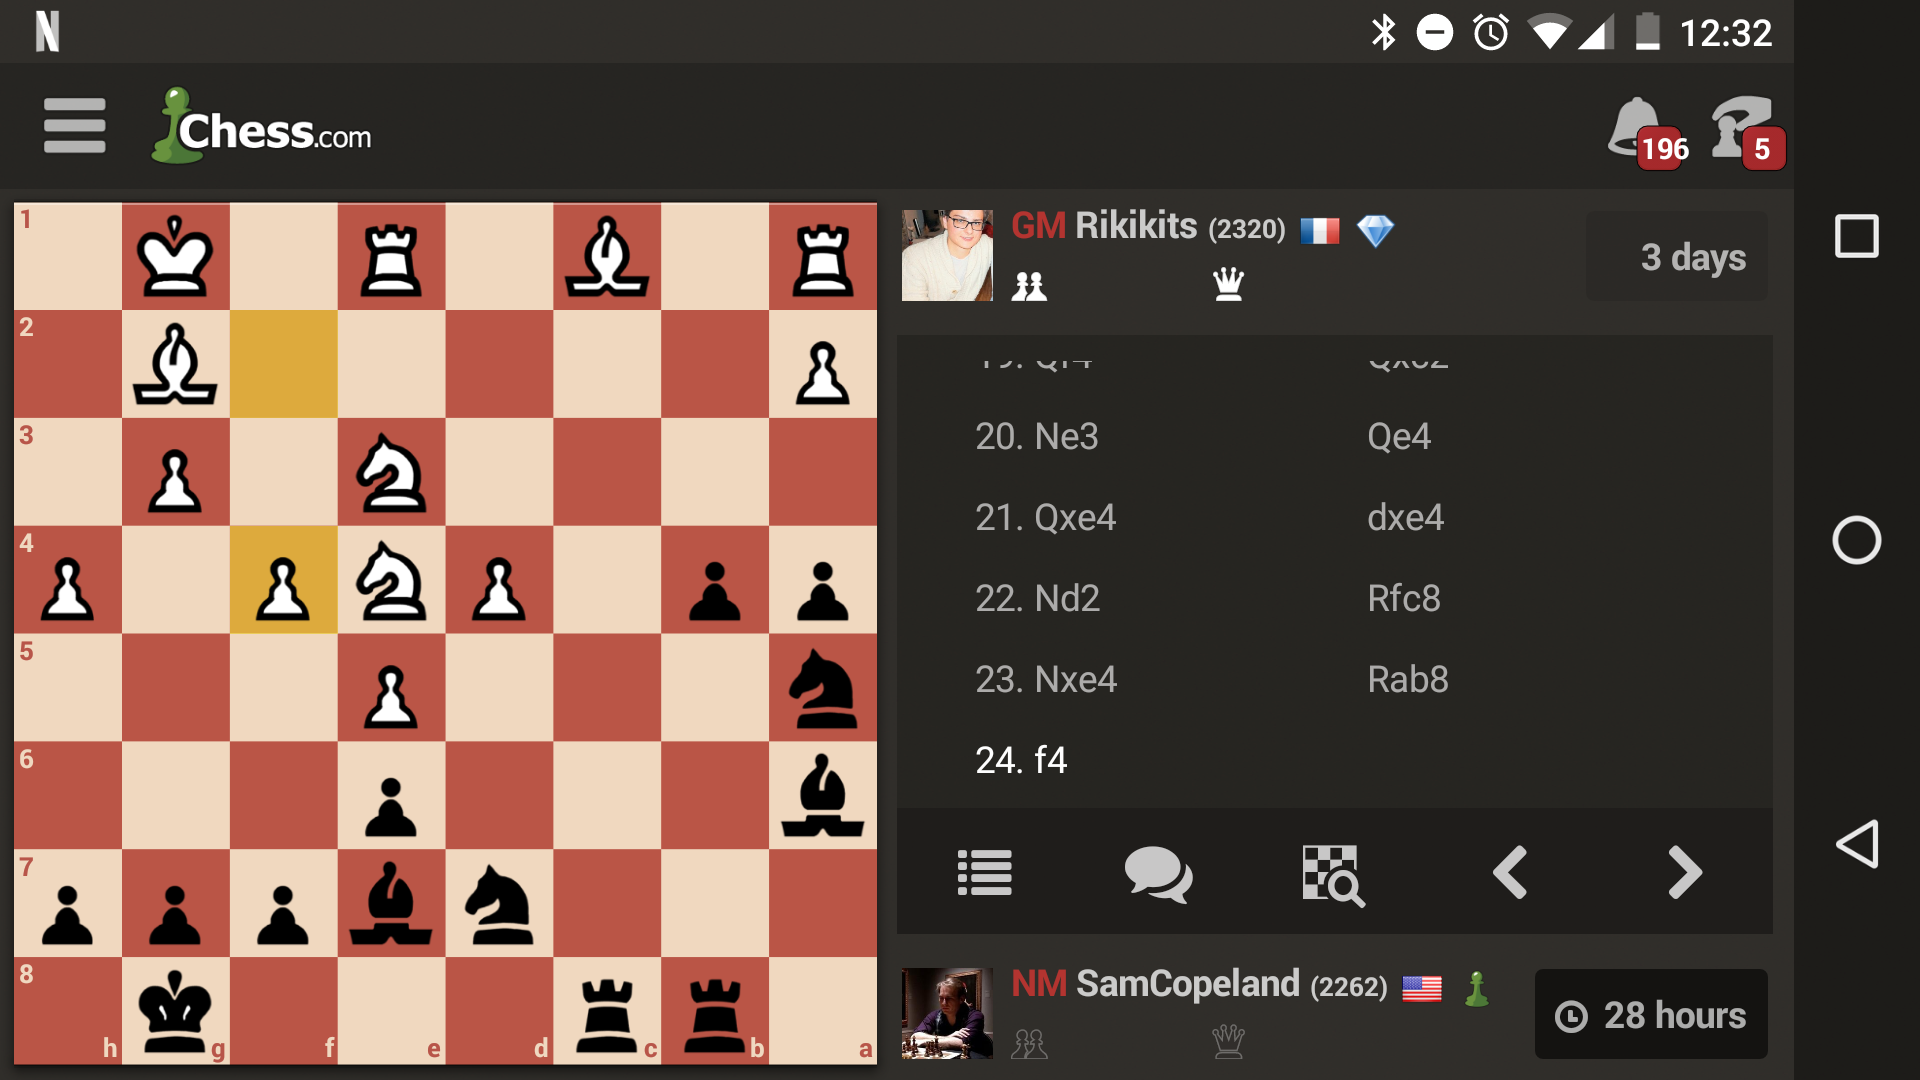 Download chessbase reader for android computer